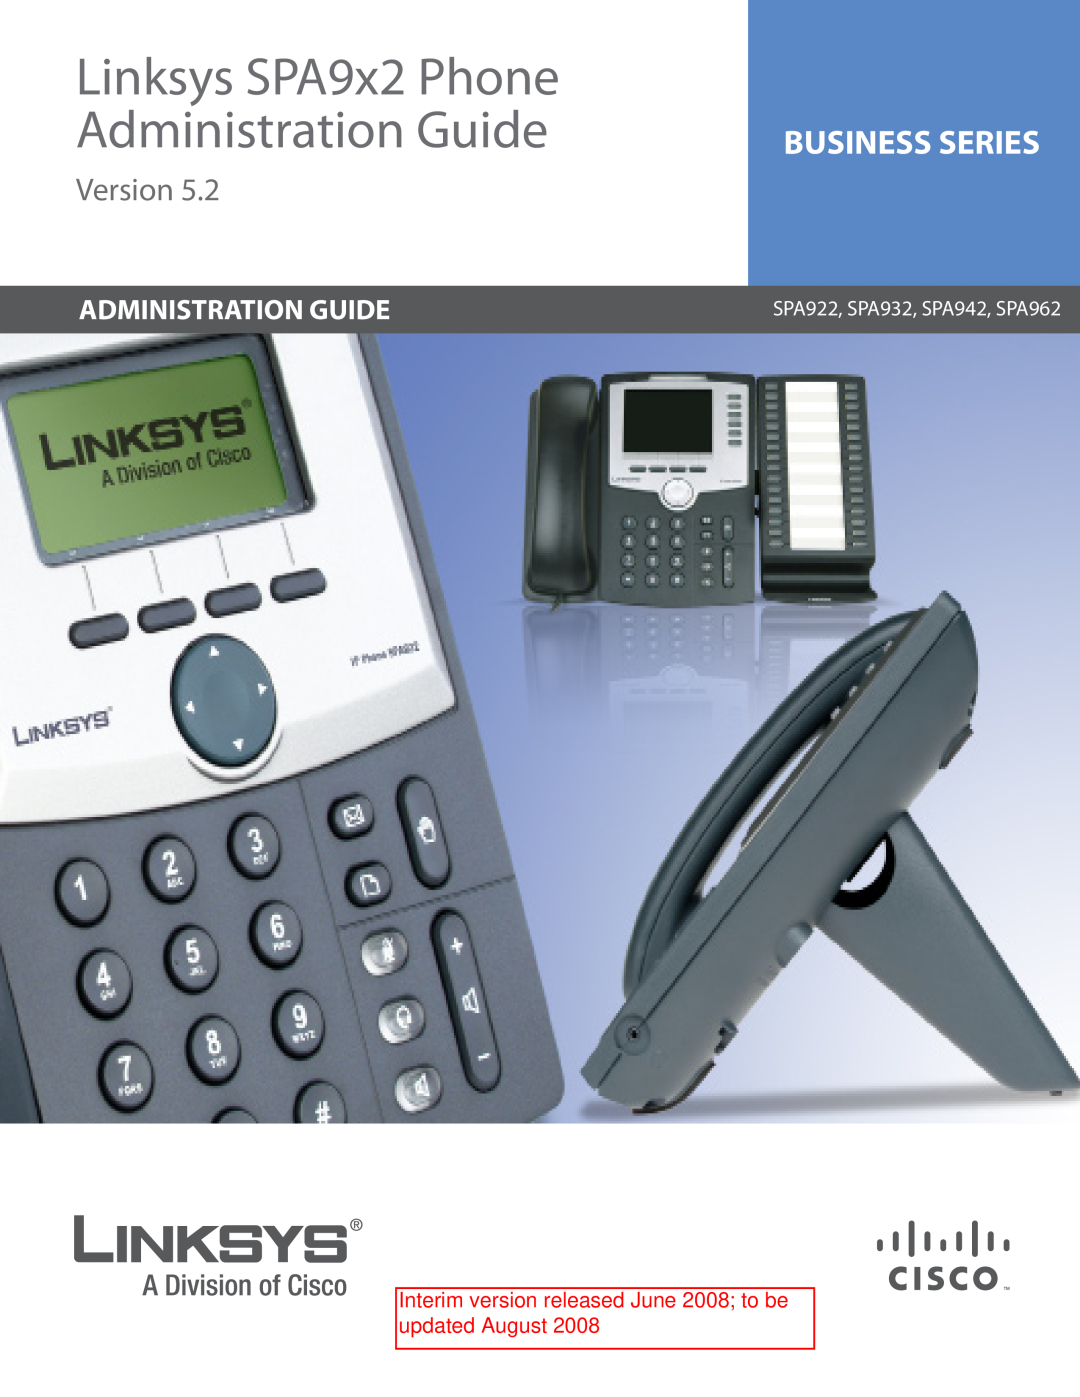 Linksys manual Linksys SPA9x2 Phone Administration Guide, Business Series, Version, SPA922, SPA932, SPA942, SPA962 